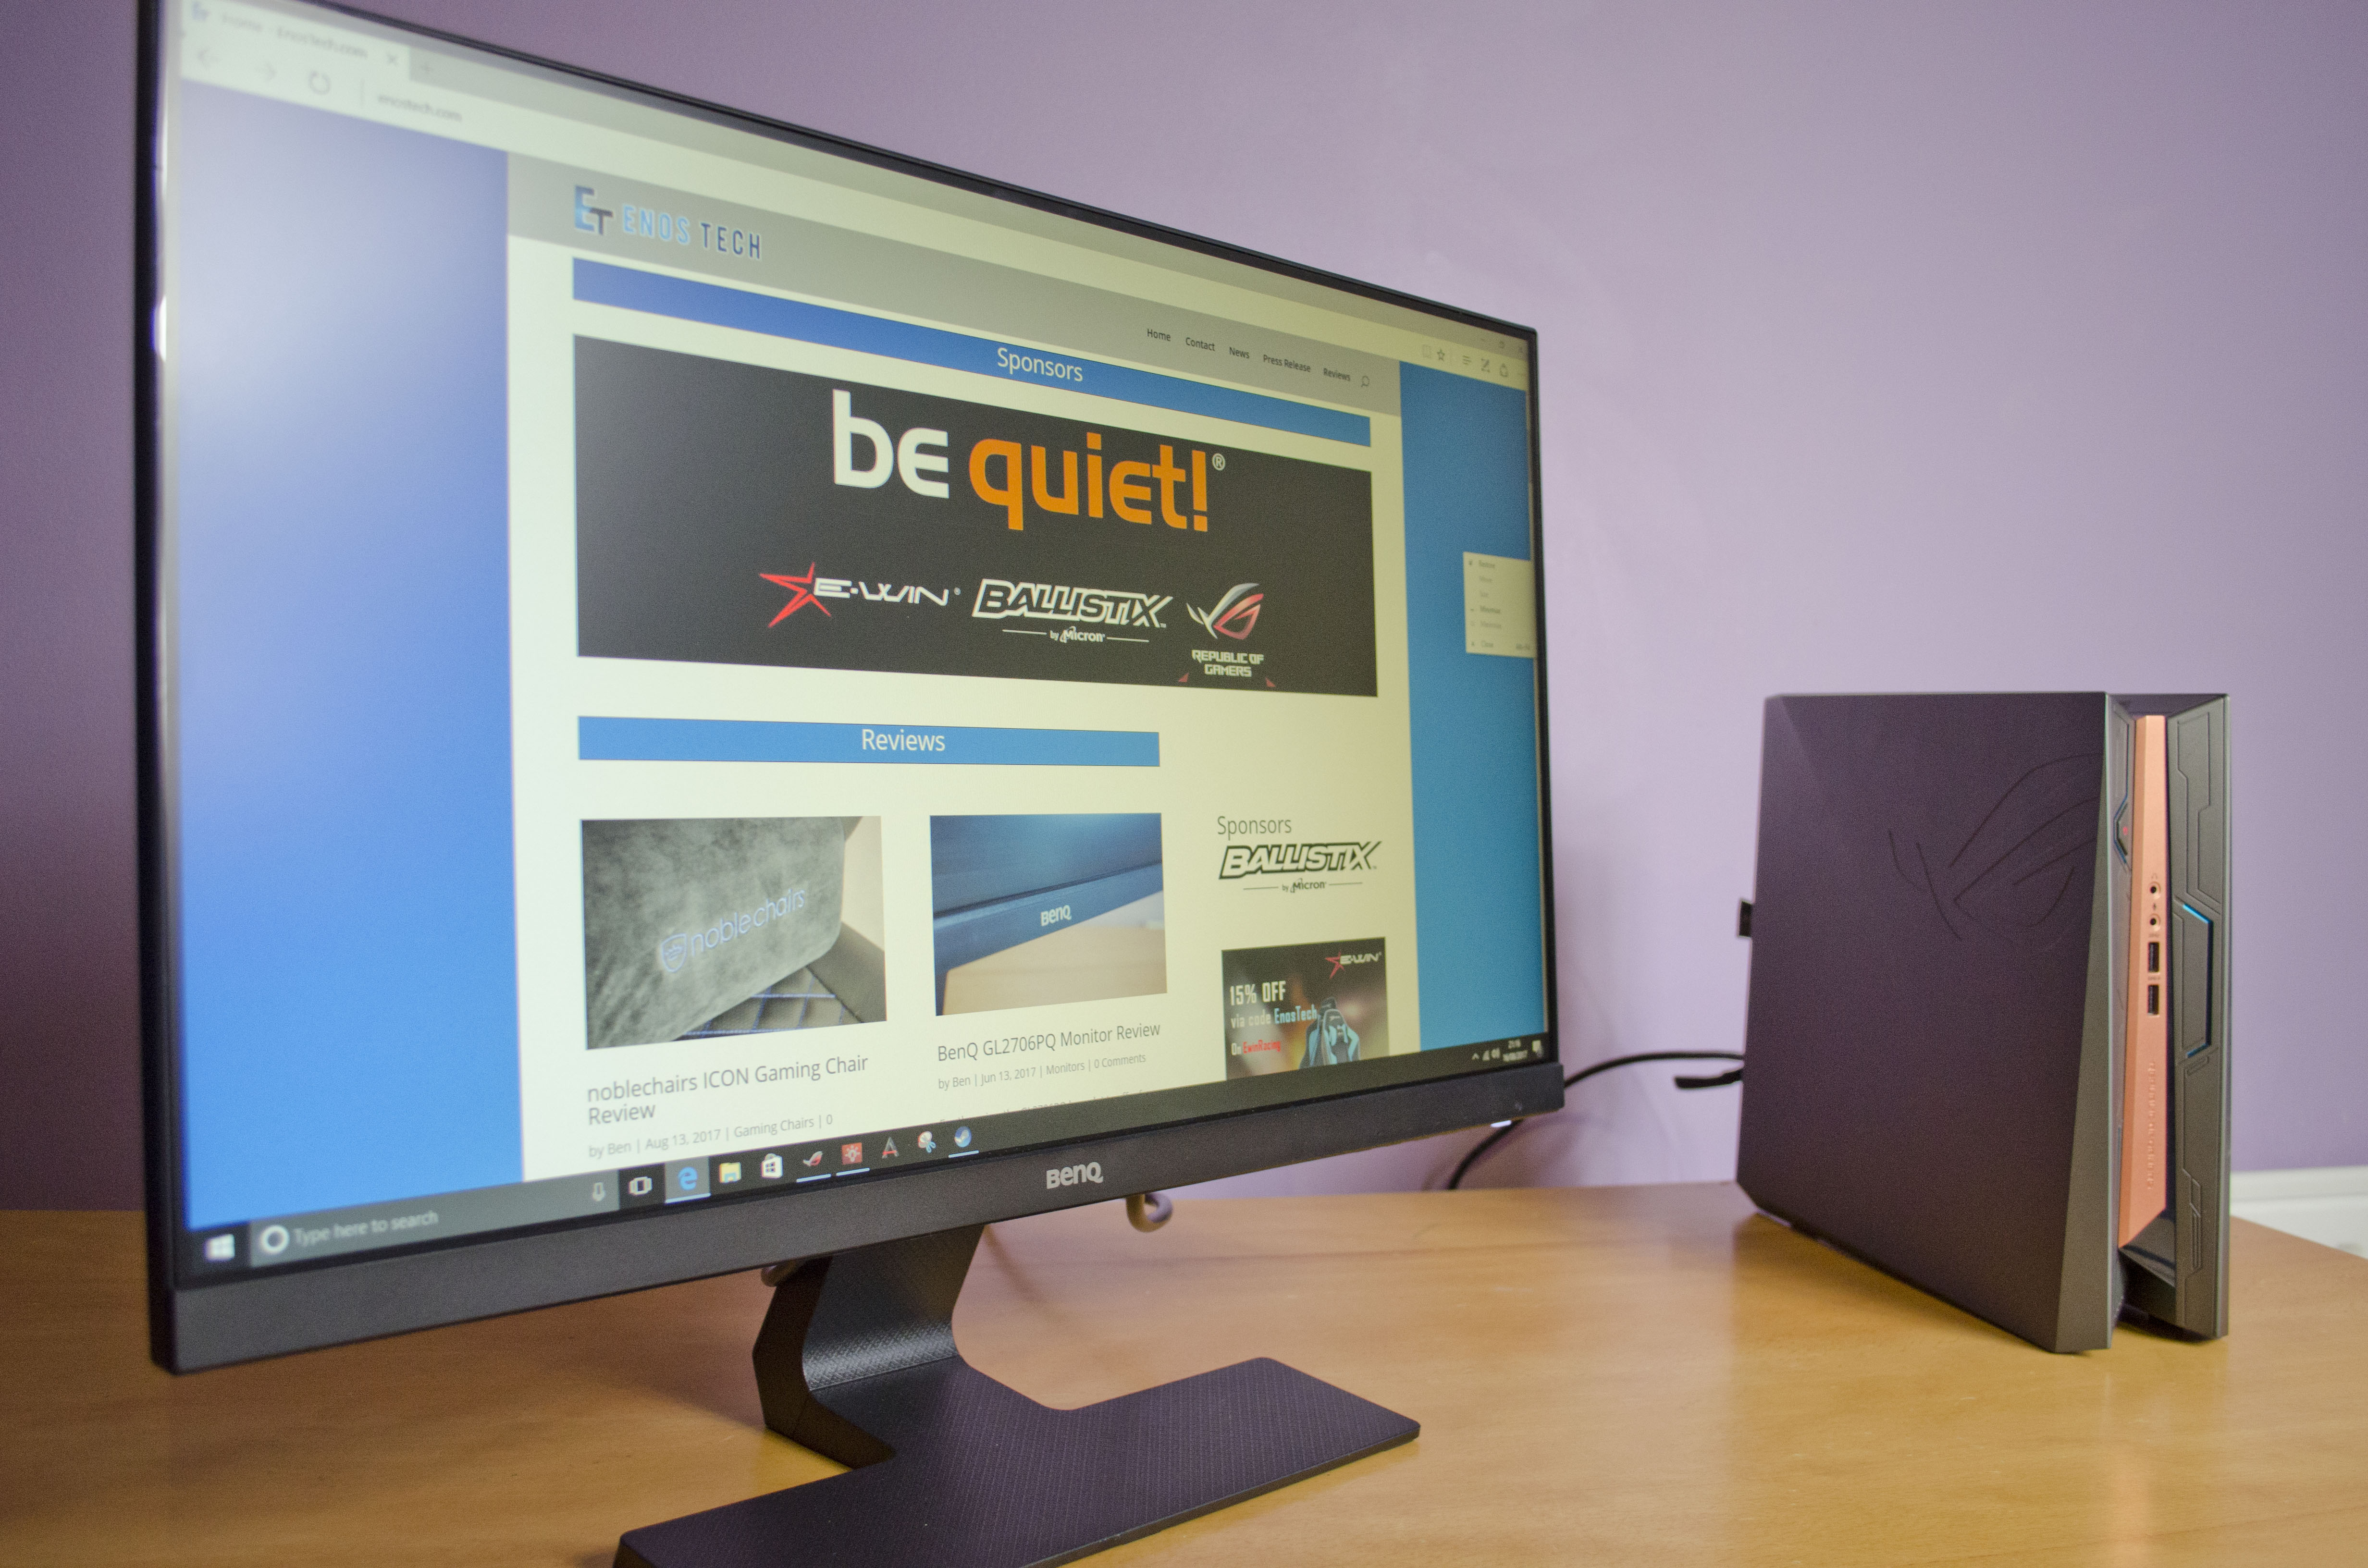 BenQ GL2580HM Monitor Review